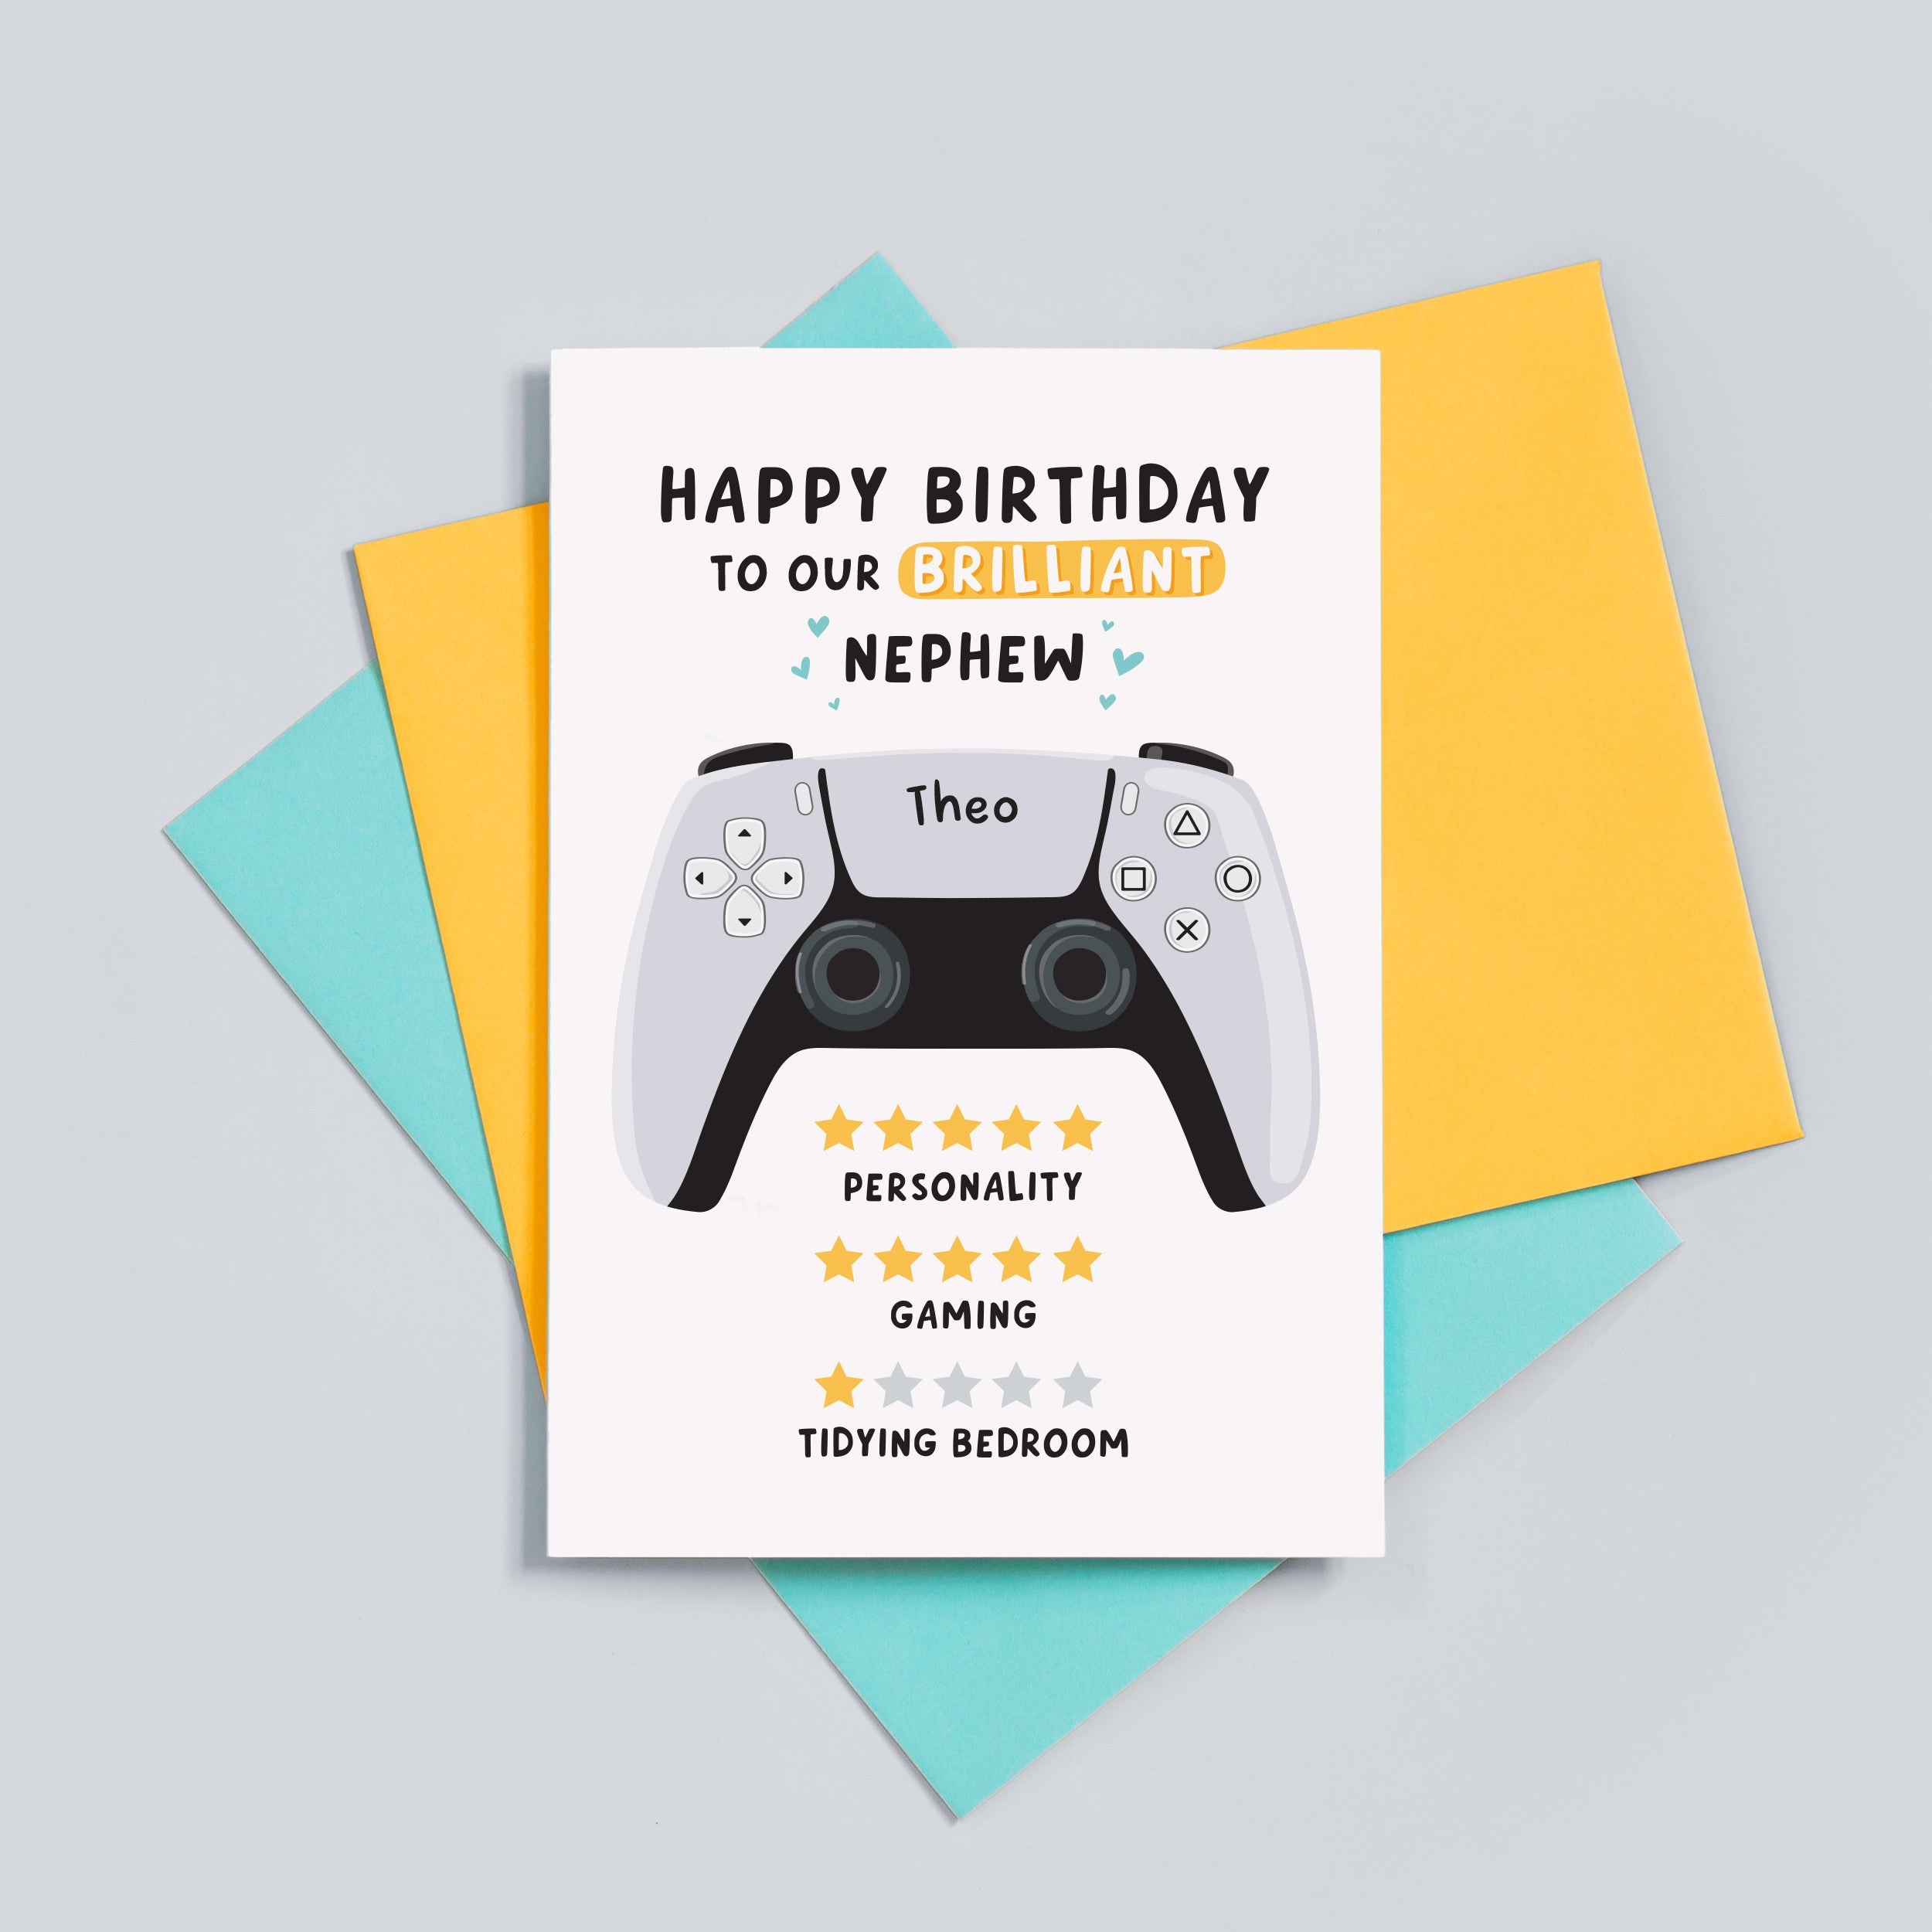 Funny gamer birthday card which reads 'happy birthday to our brilliant nephew'. 5 stars for personality, 5 stars for gaming and 1 star for tidying bedroom. The card features an illustration of a PS5 controller and can be personalised with a name.